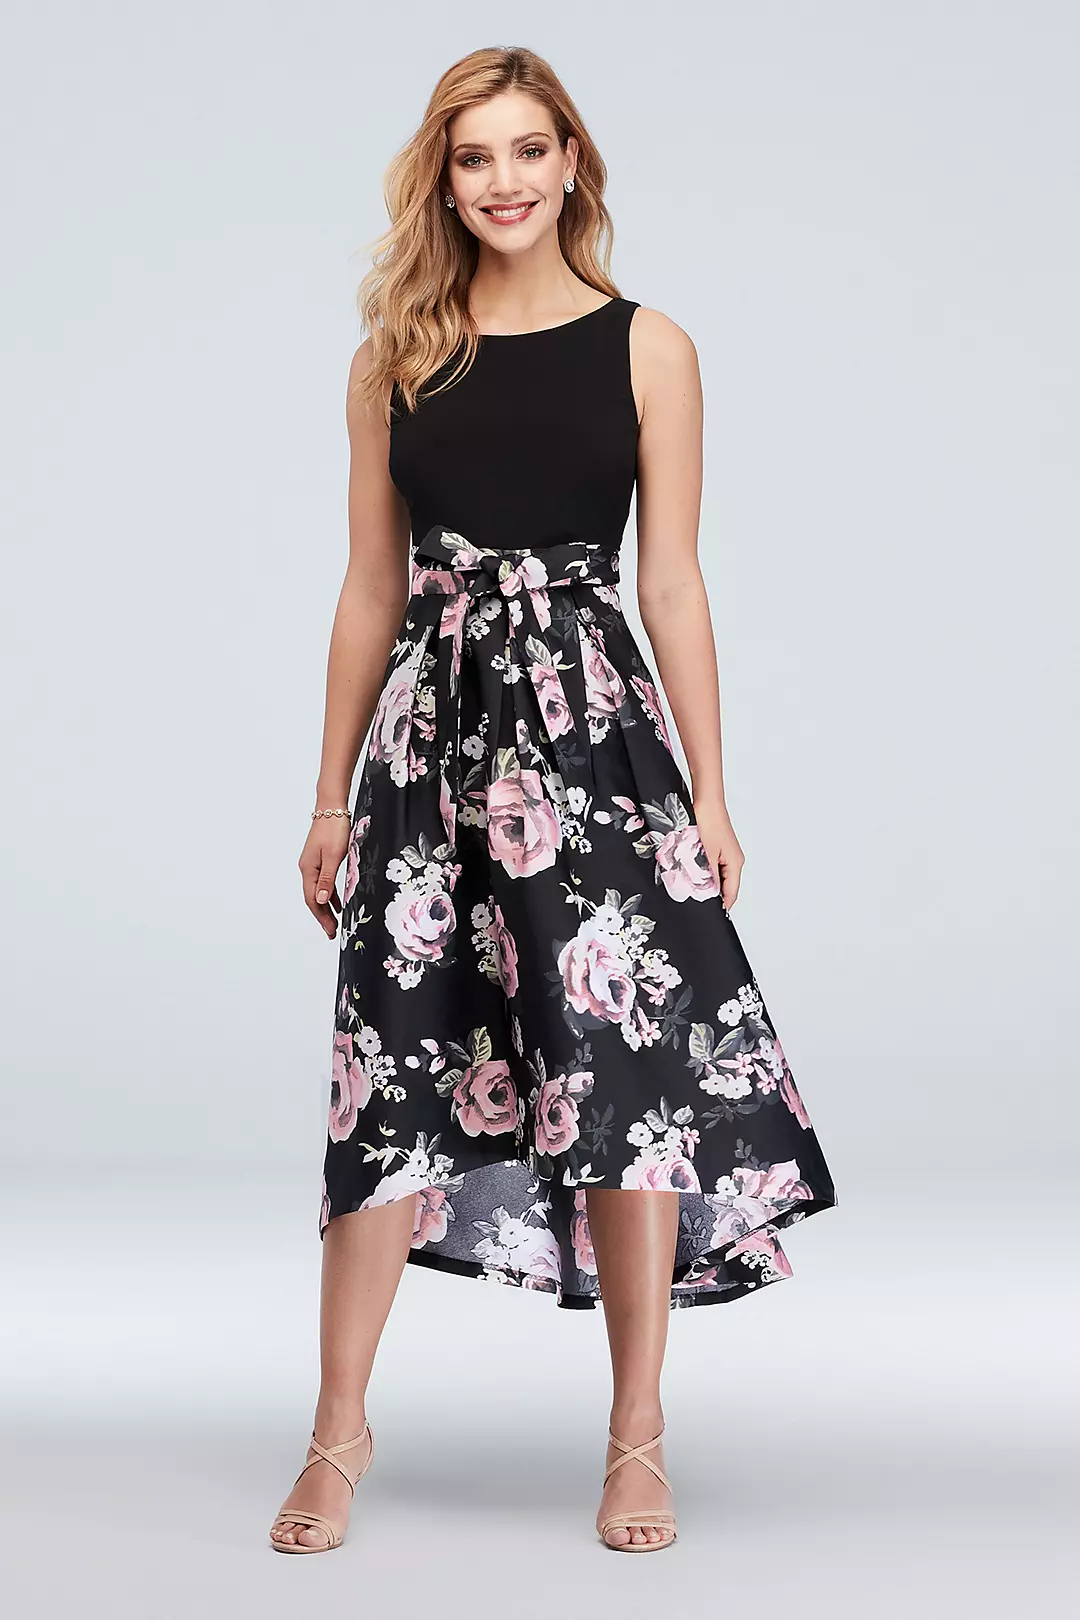 Boat Neck Floral High-Low Ball Gown with Bow Image